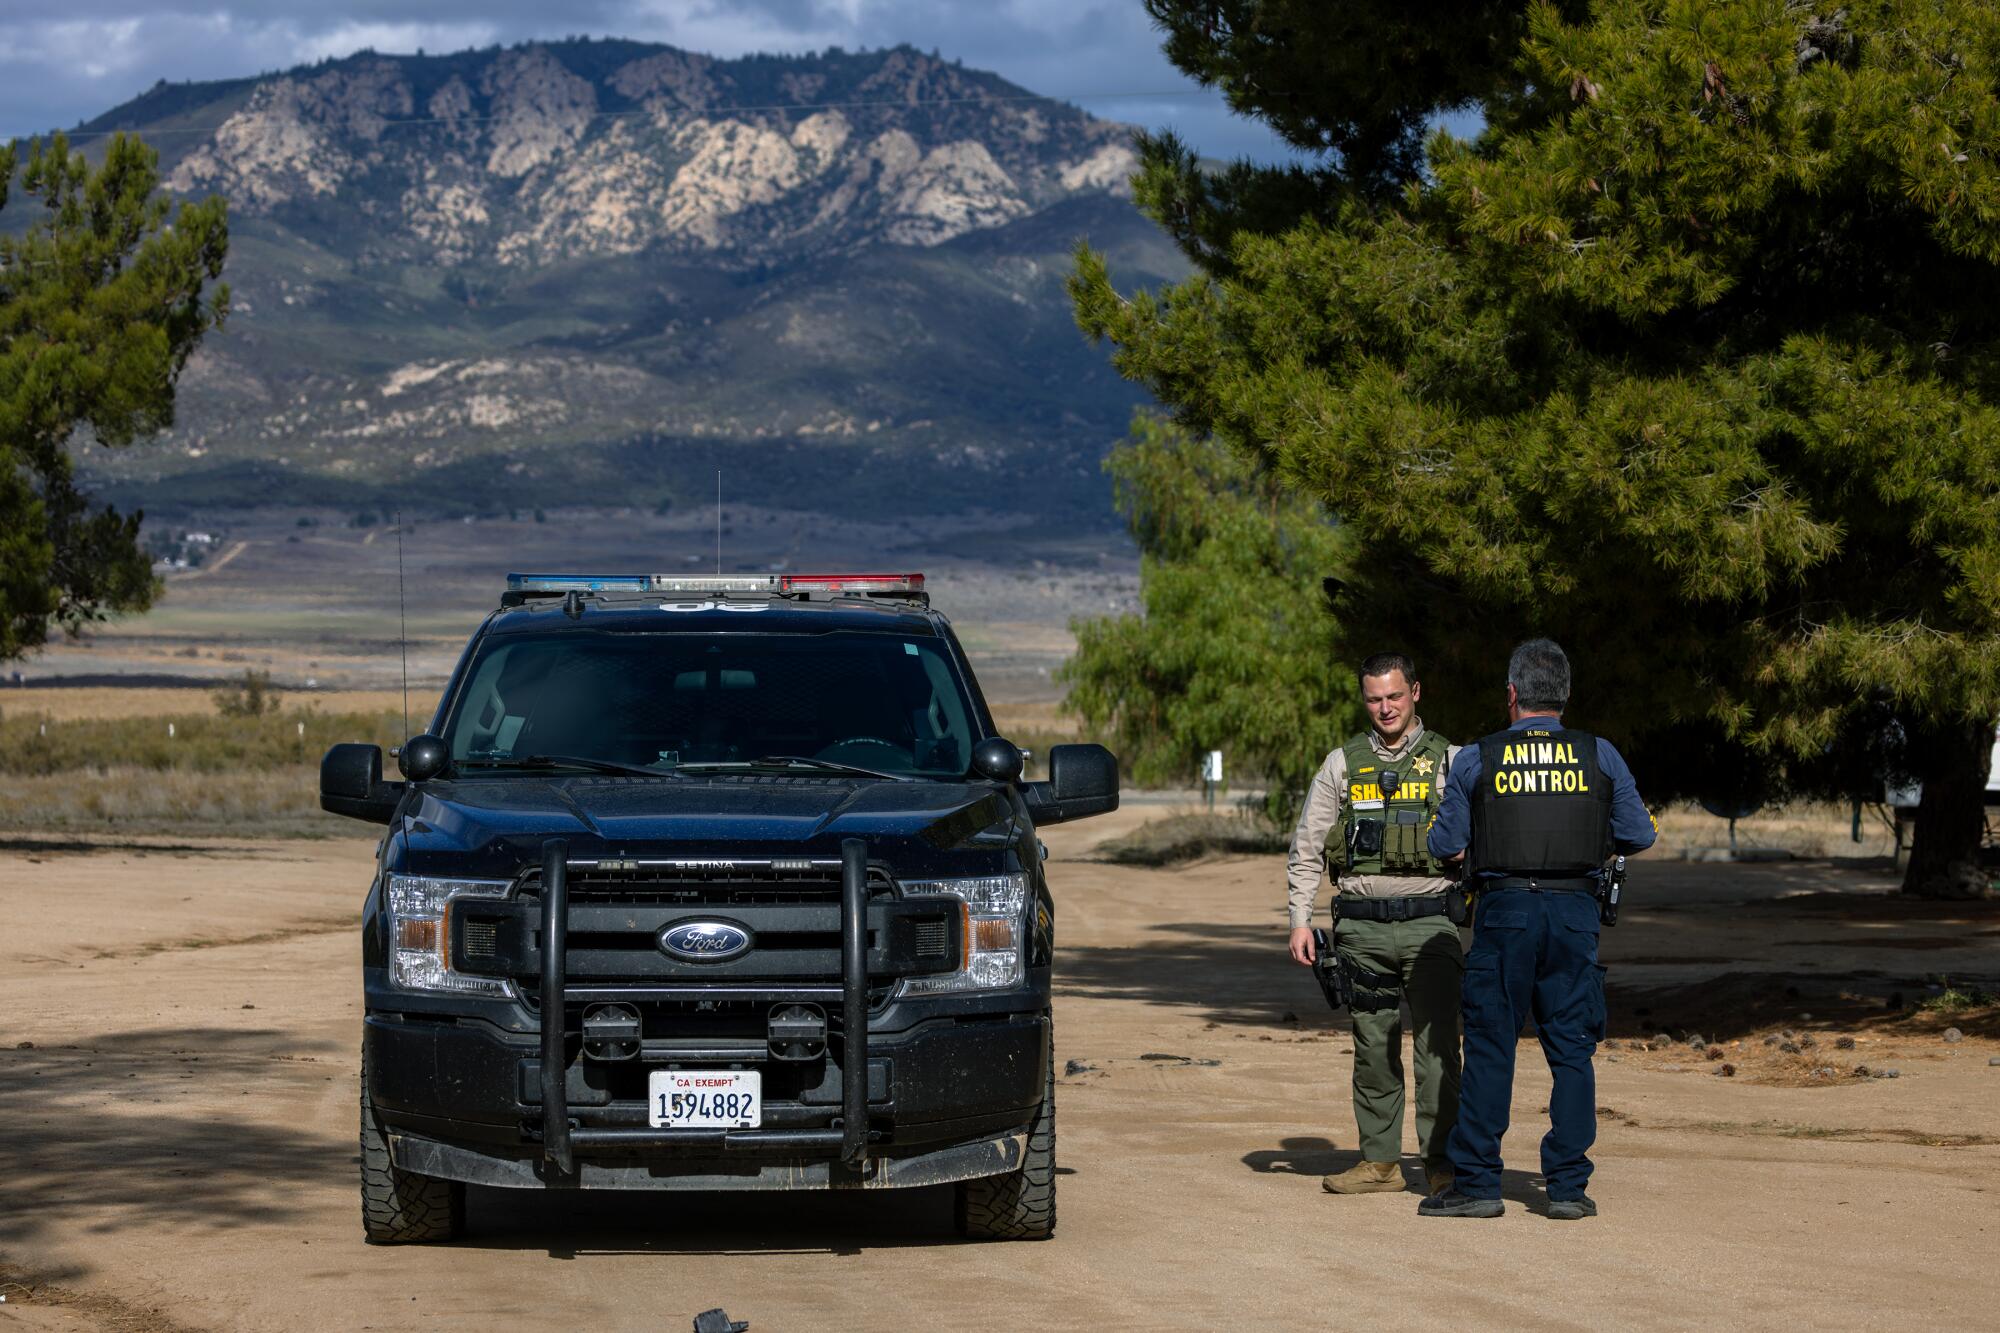 An animal control officer and a sheriff's deputy stand beside a cruiser as a mountain rises in the background.